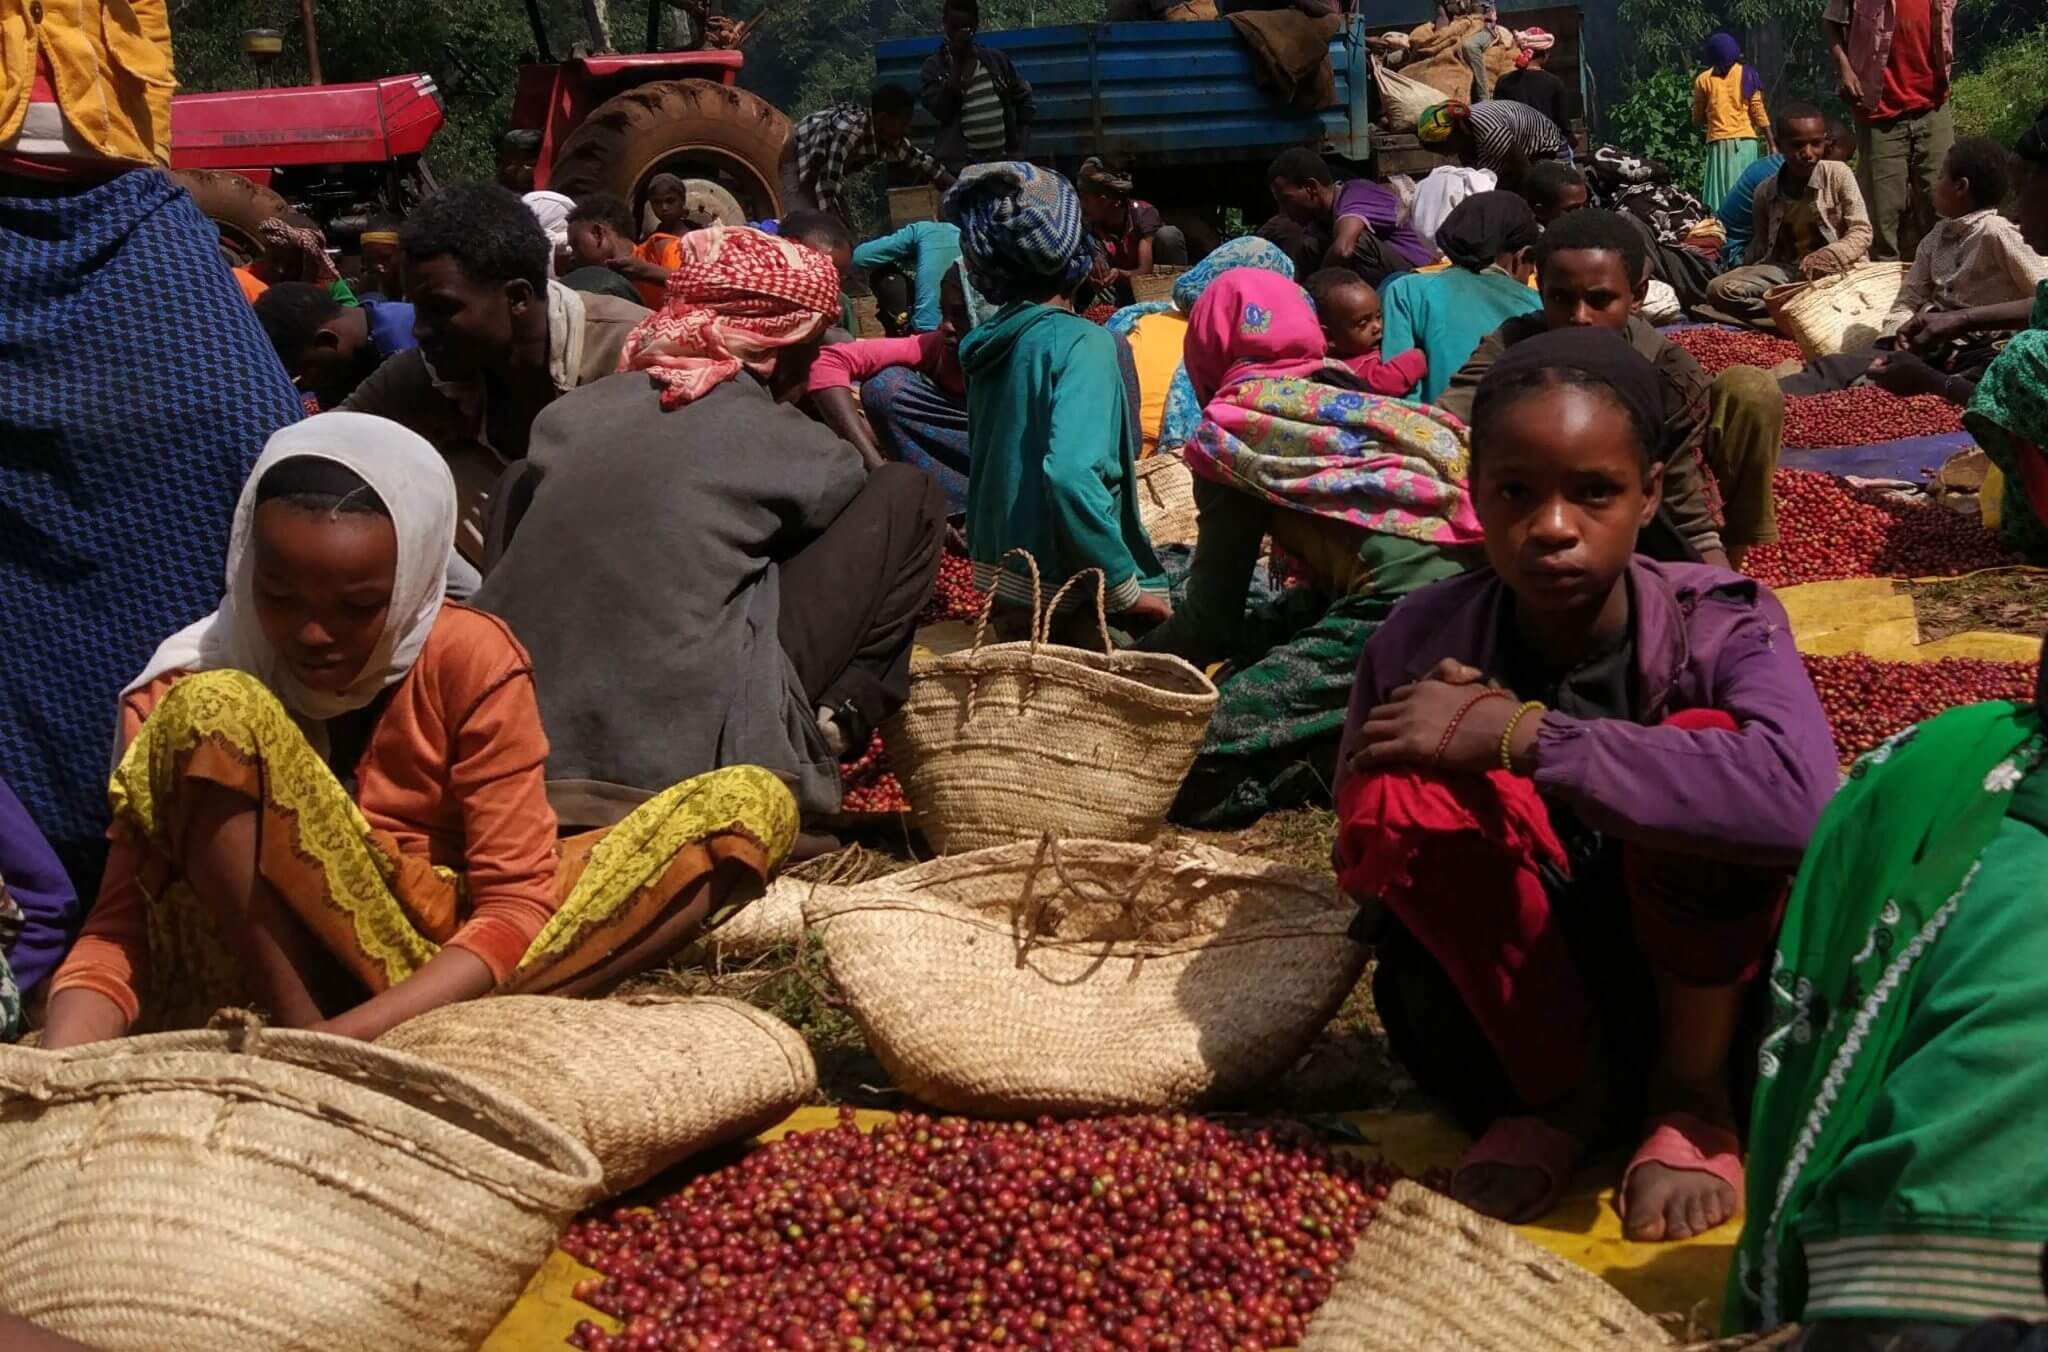 How could we deal with child labor at coffee farms? ⋆ The